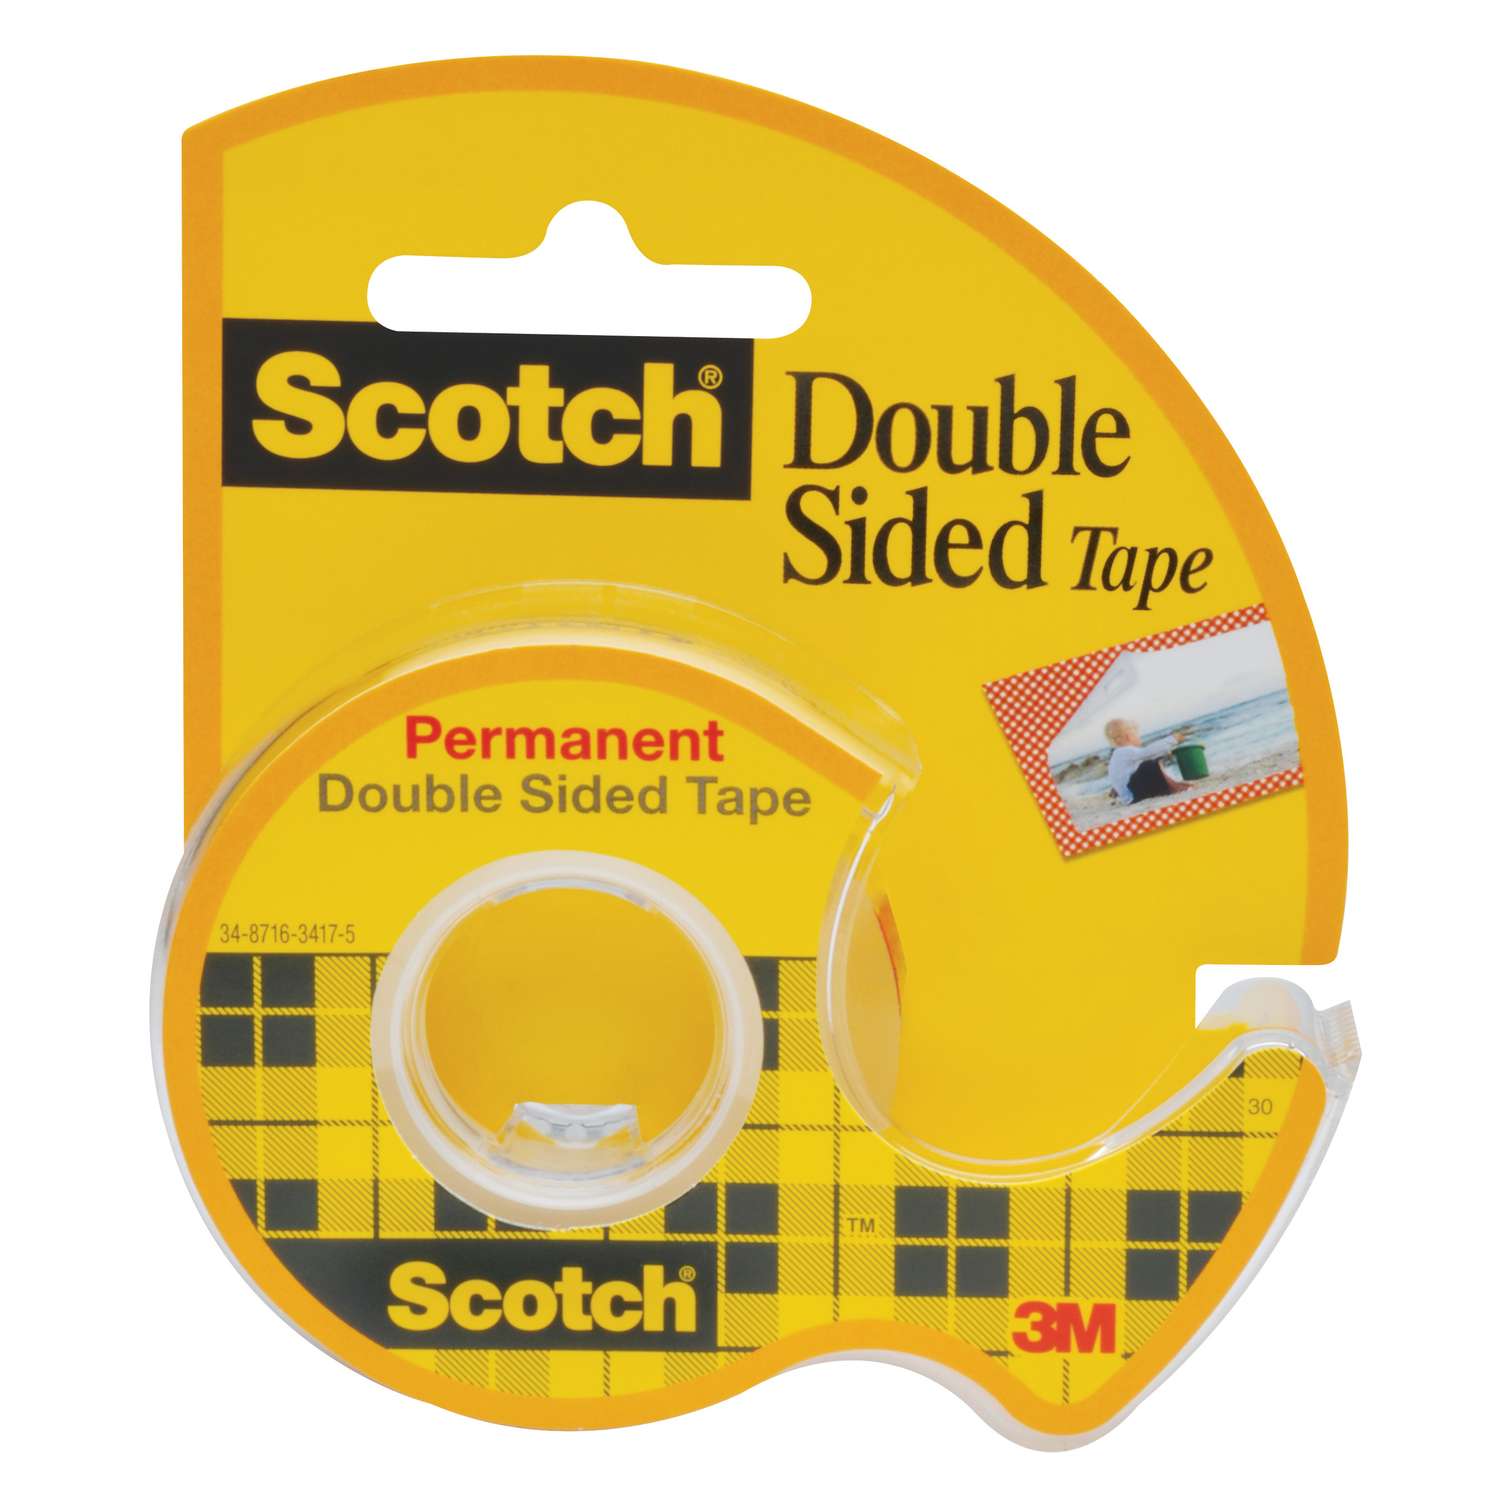 Gorilla® Double-Sided Tape, 1 ct - Fred Meyer